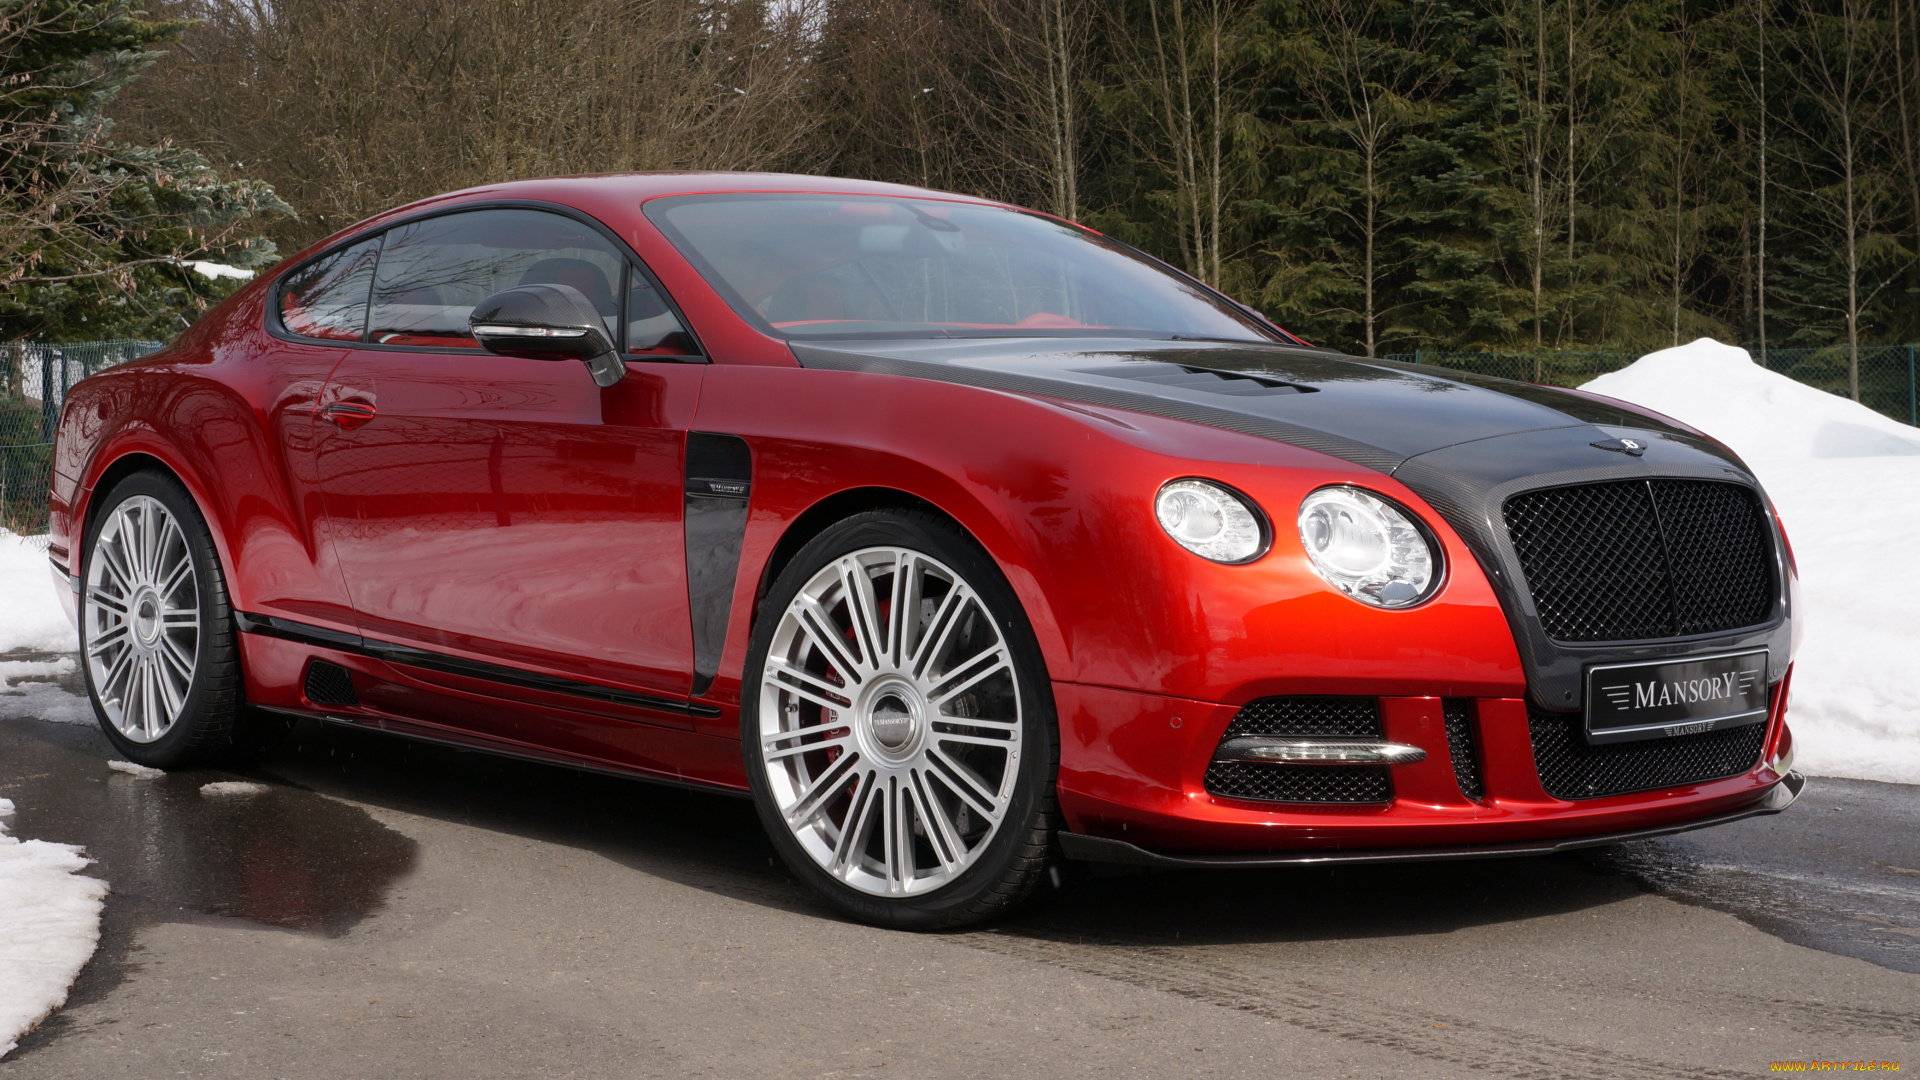 2013, mansory, sanguis, based, on, bentley, continental, gt, автомобили